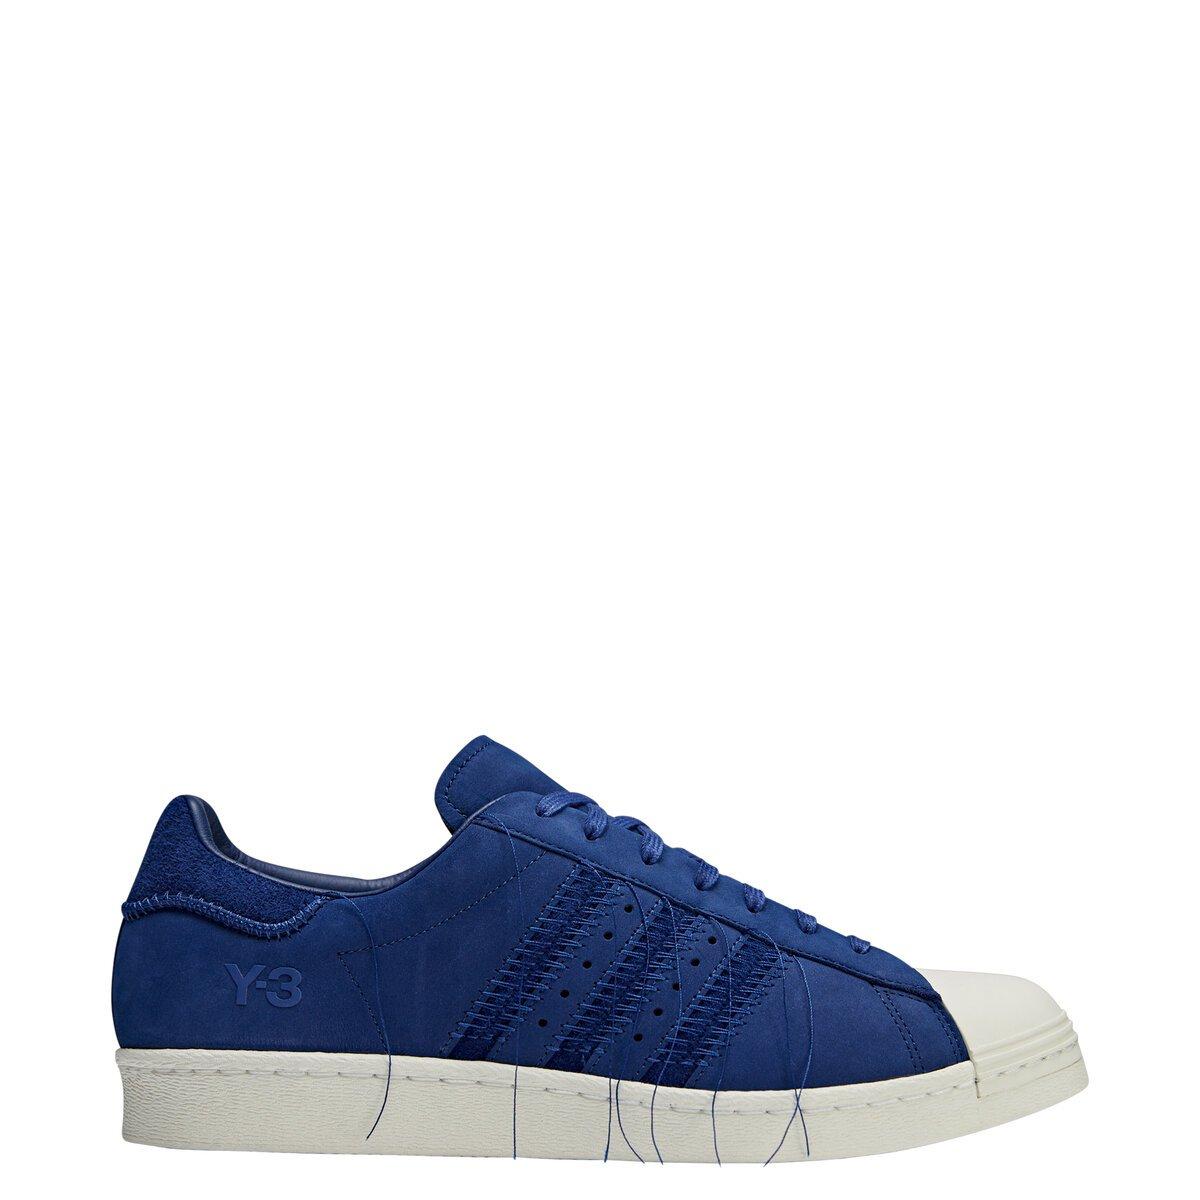 Y-3 Superstar Sneakers In Blue/off-white for Men | Lyst